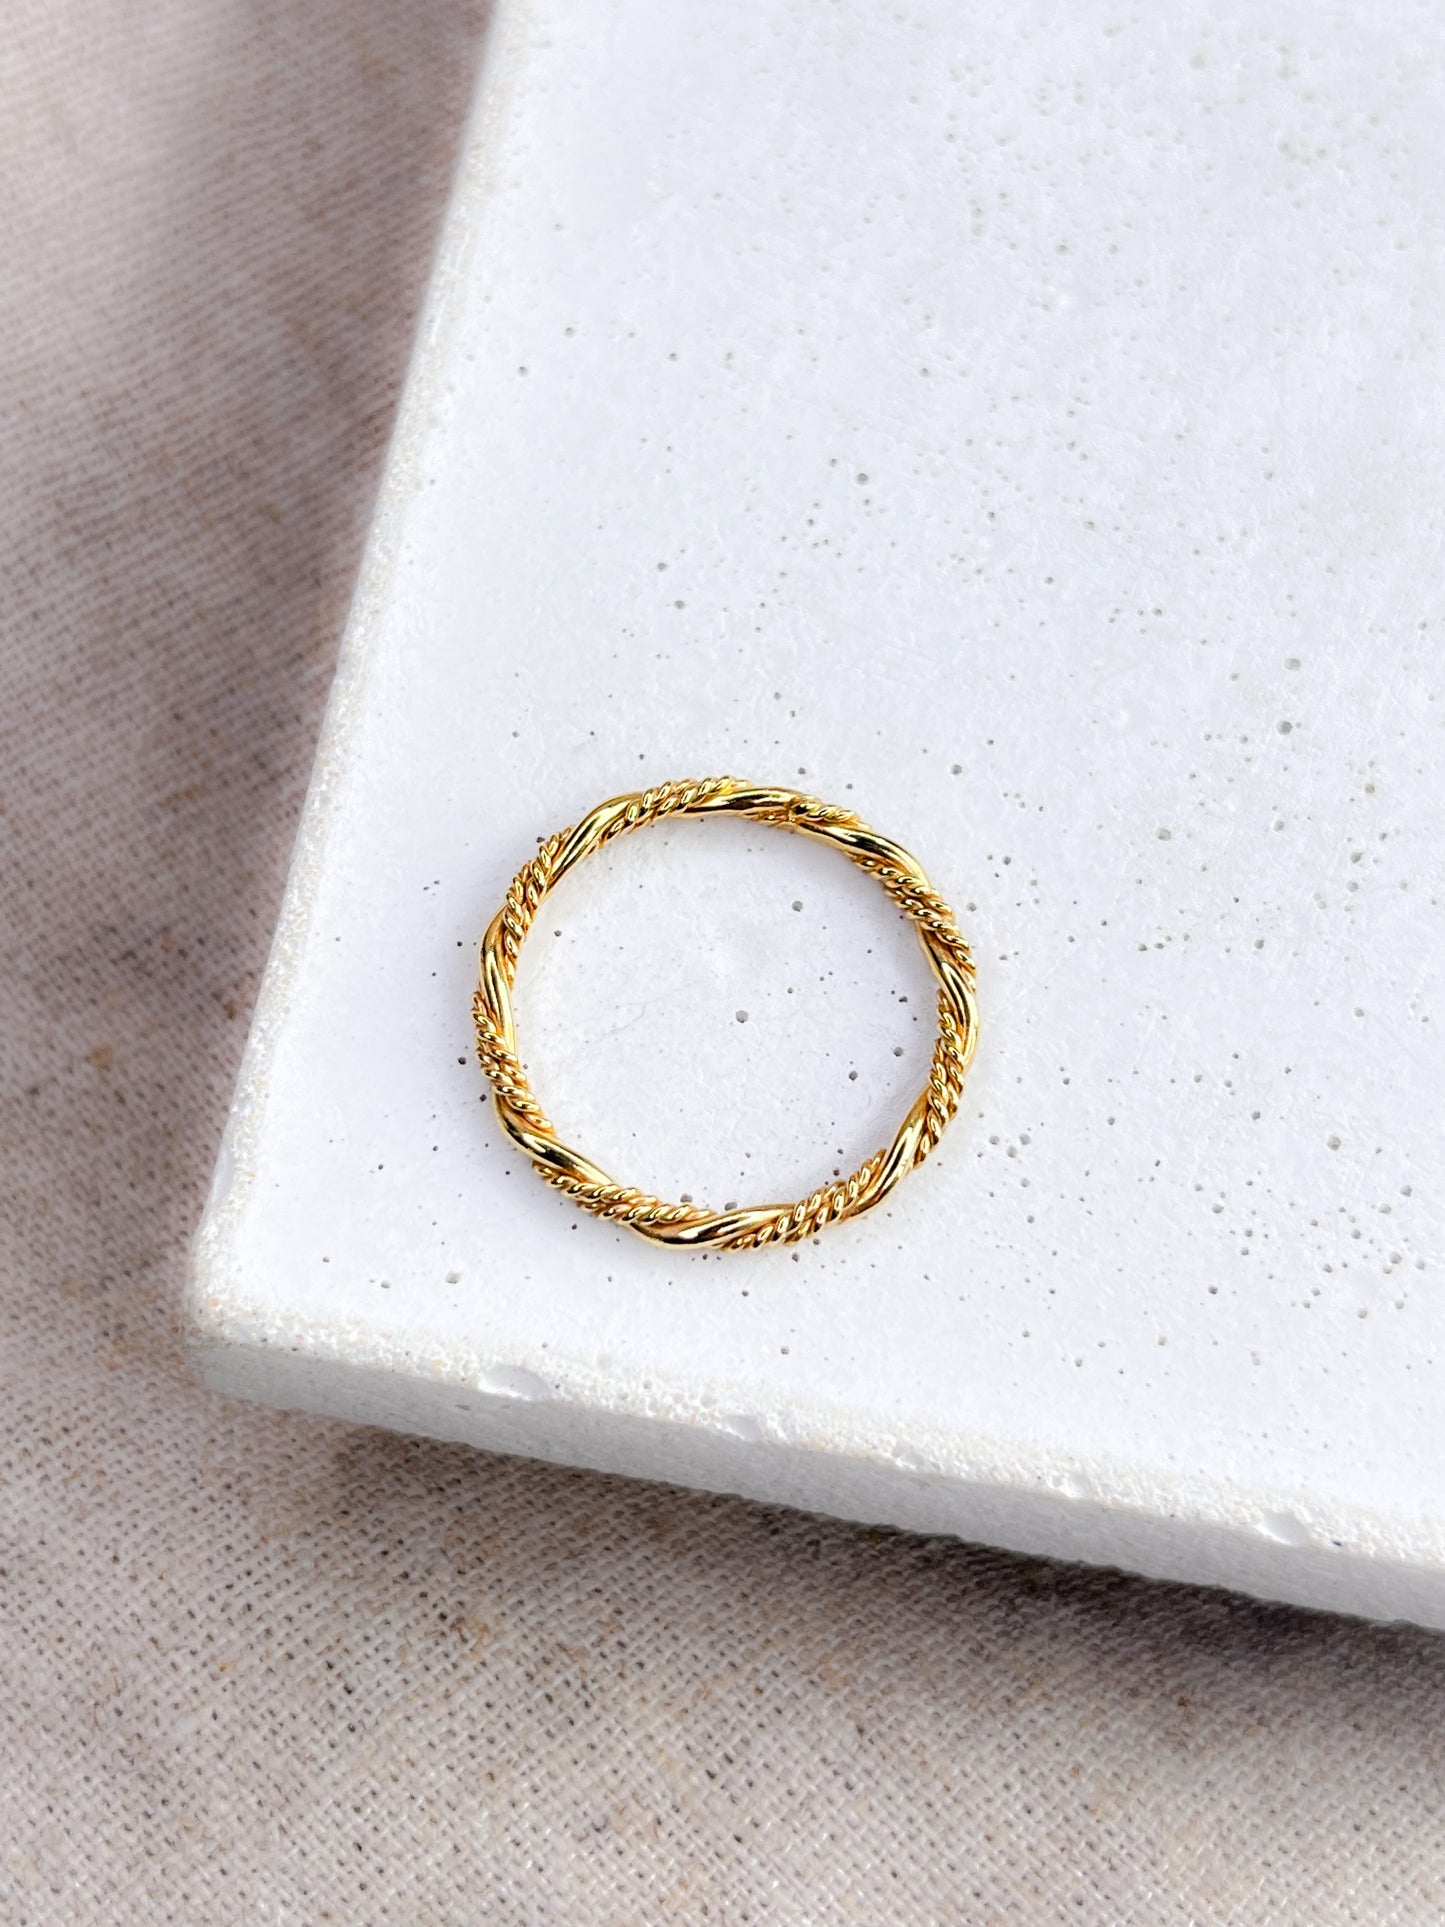 Gold Vermeil Double Twist Band Ring